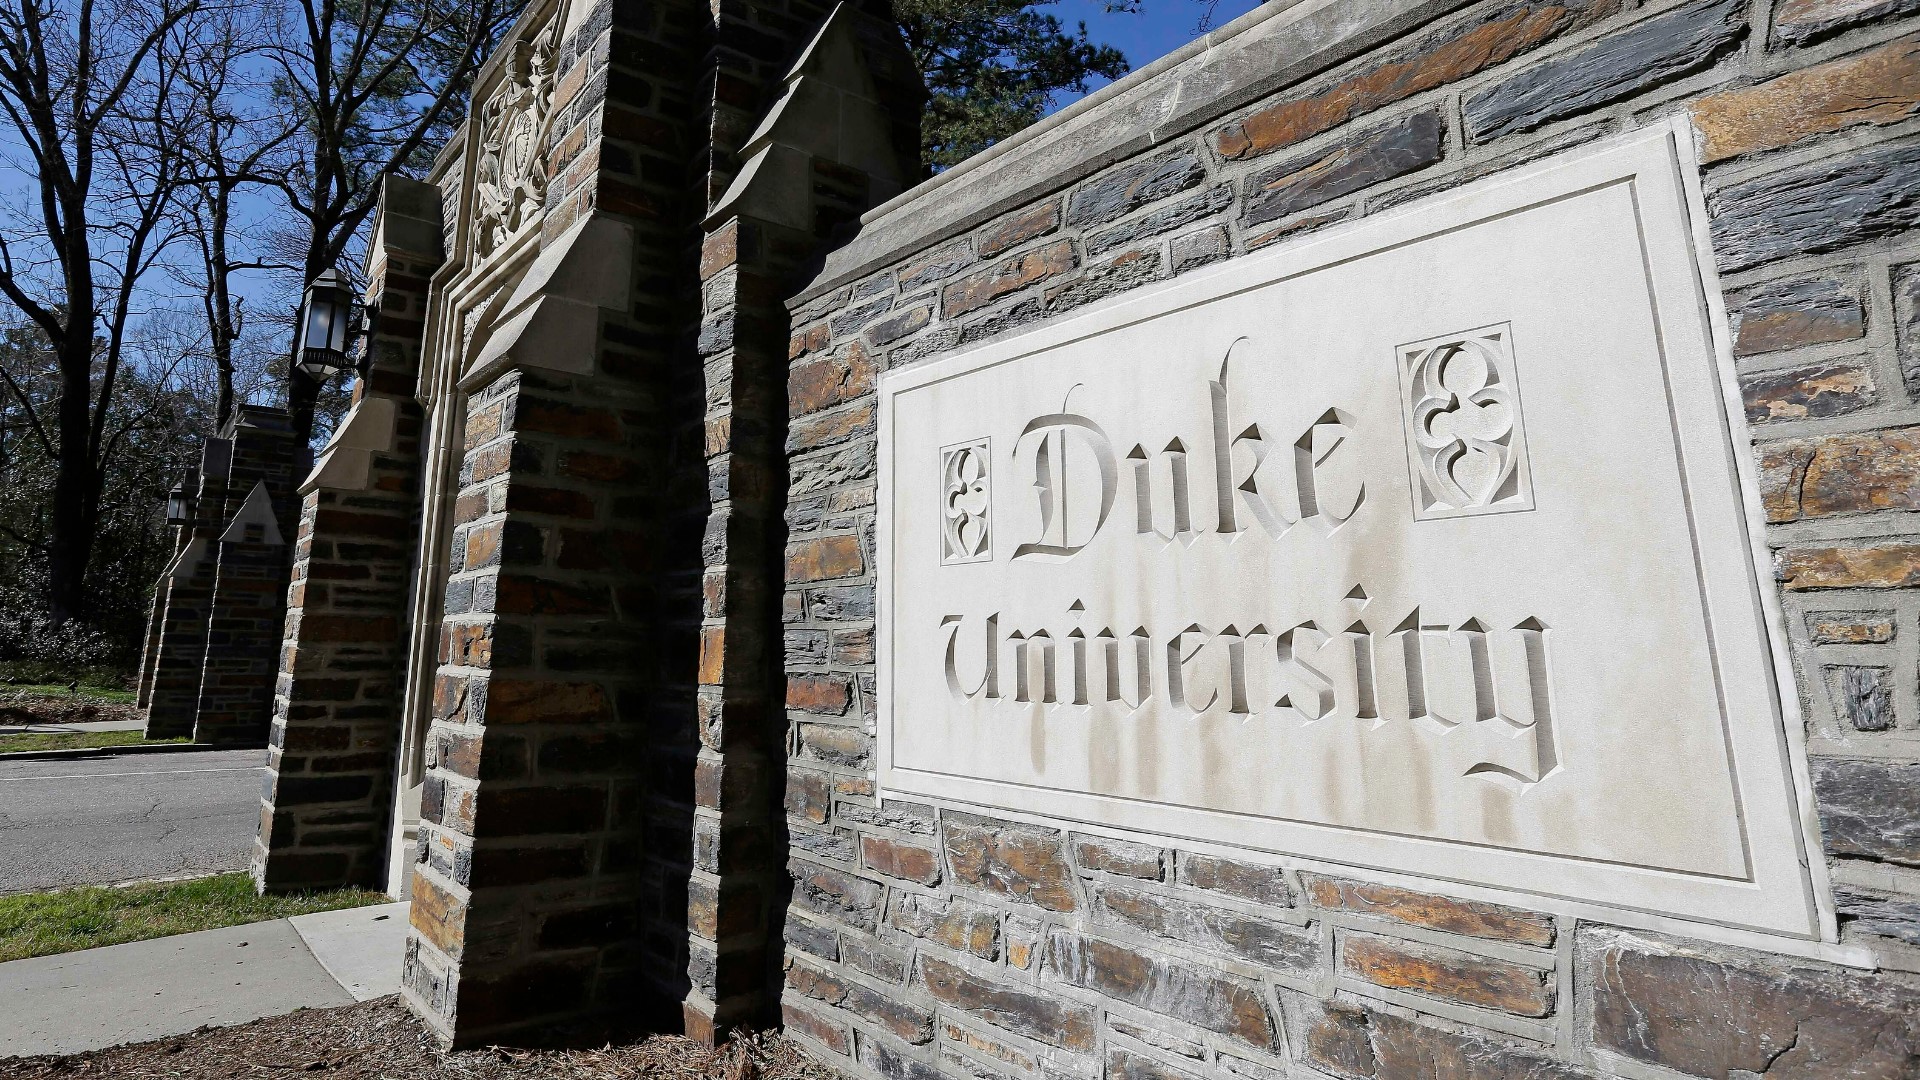 Duke University announced effective Friday, July 30, everyone will be required to wear masks indoors, regardless of vaccine status.